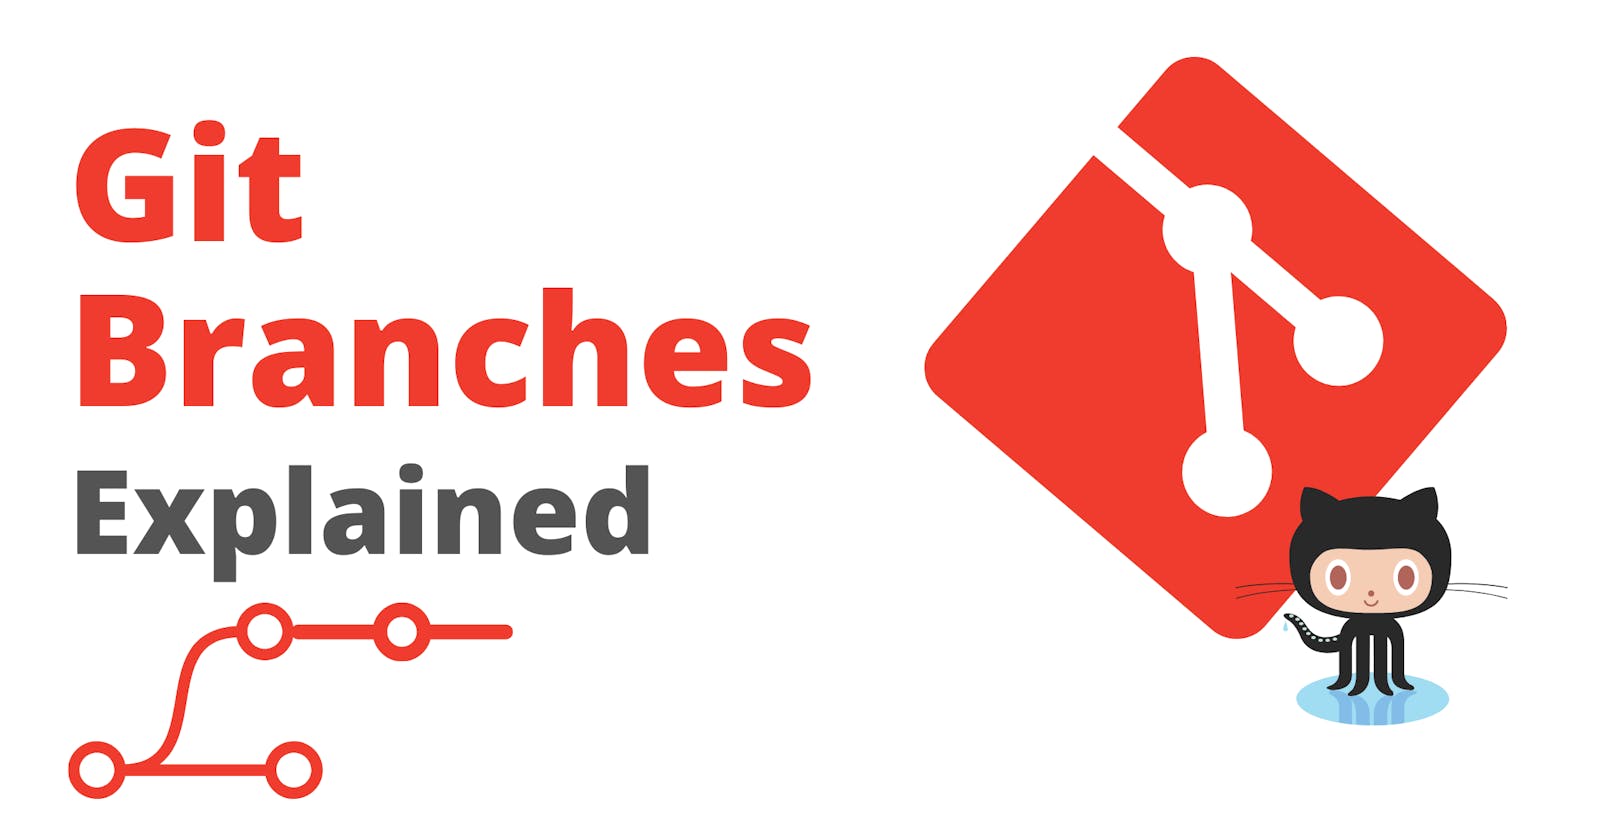 Git Branches explained.